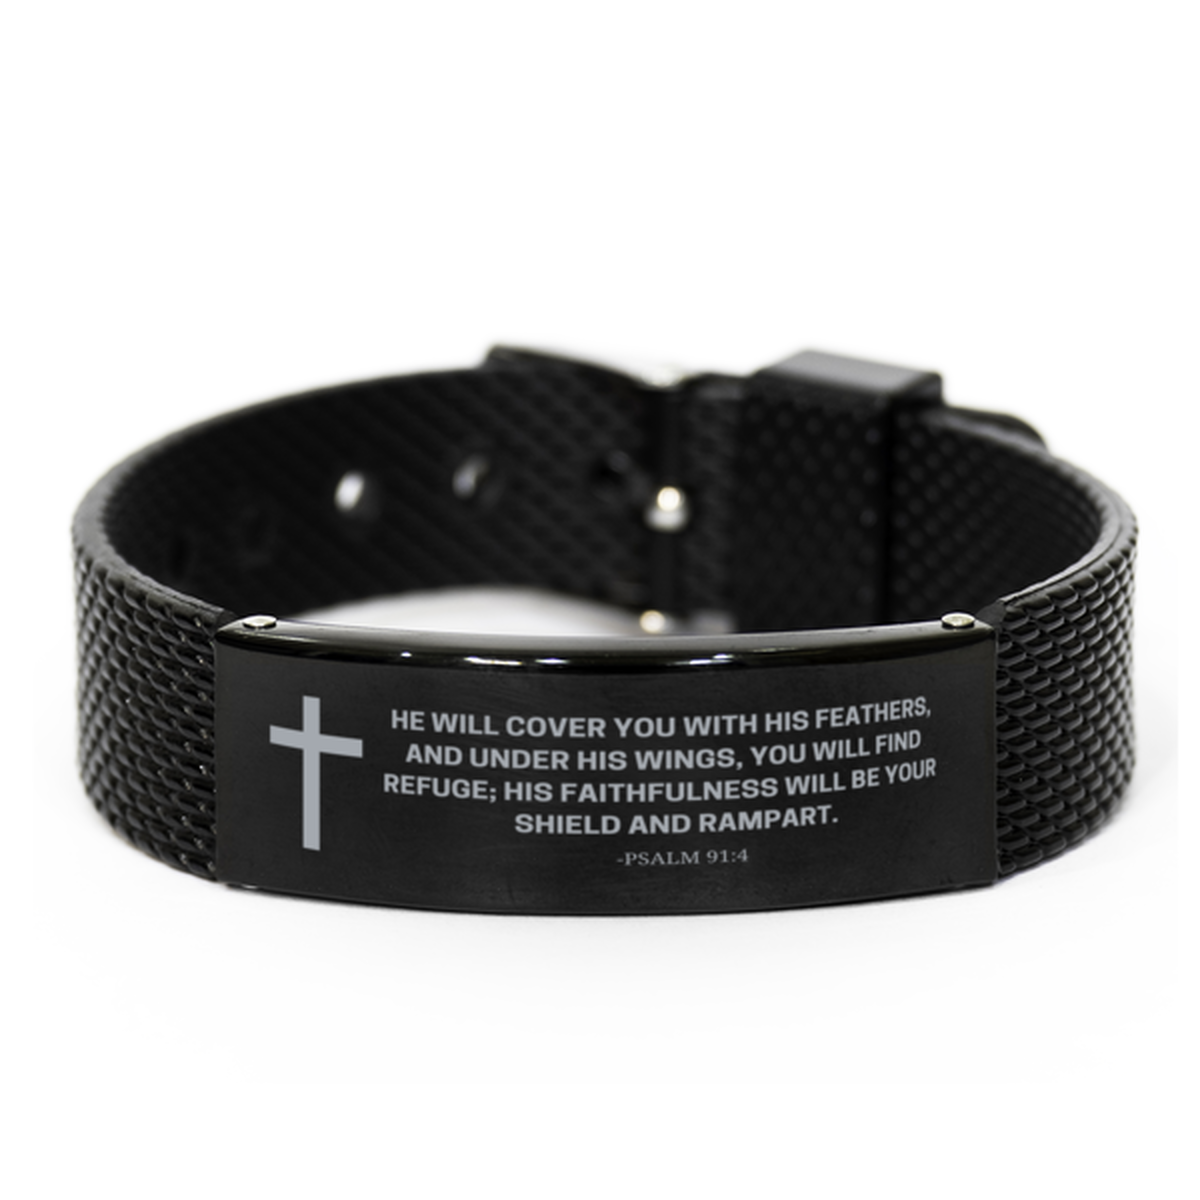 Baptism Gifts For Teenage Boys Girls, Christian Bible Verse Black Shark Mesh Bracelet, He will cover you with his feathers, Catholic Confirmation Gifts for Son, Godson, Grandson, Nephew